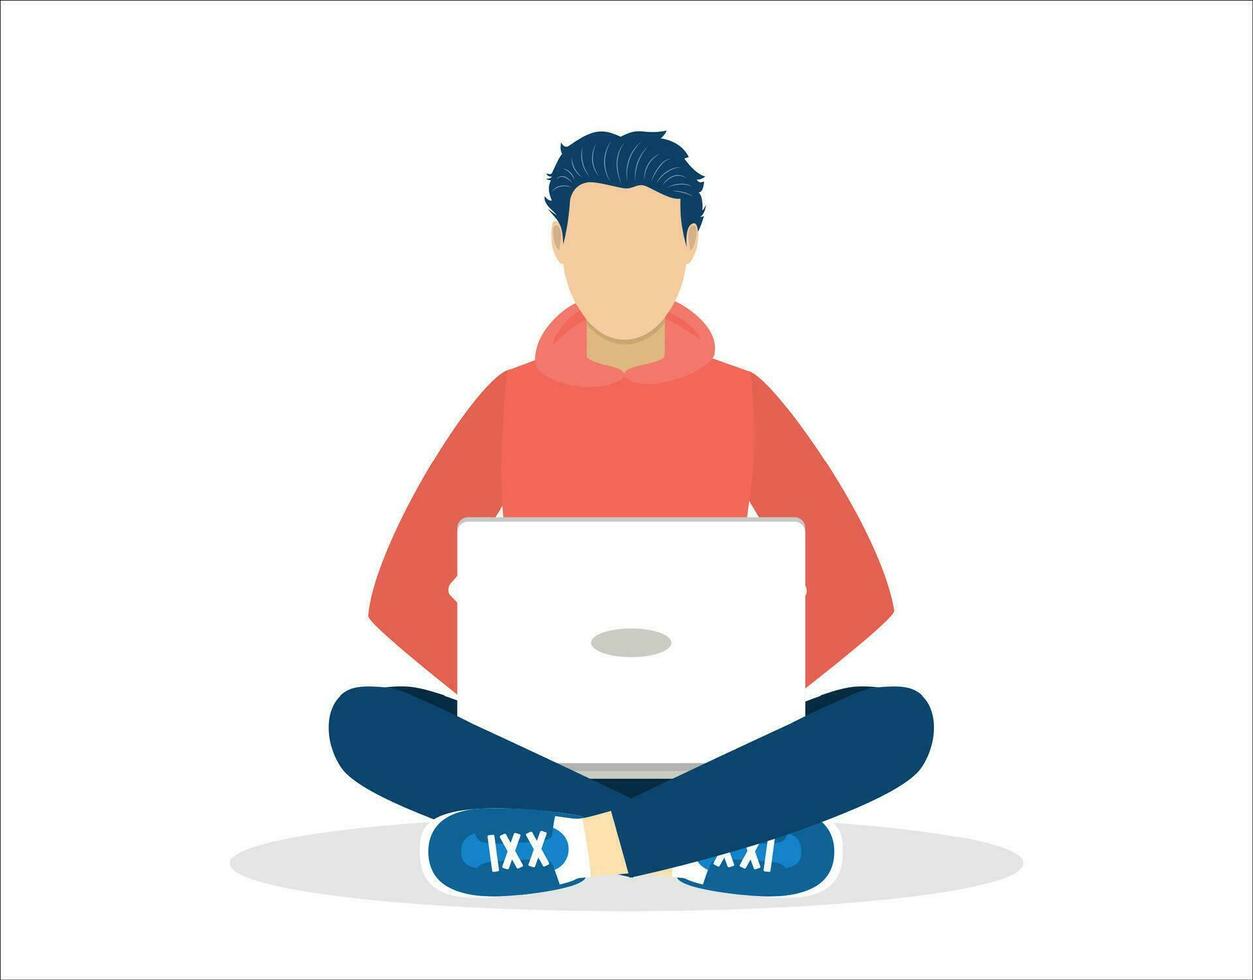 man with laptop sitting isolated on white background with crossed legs. Freelance or studying concept. web page design template for online education, training. Vector illustration in flat style